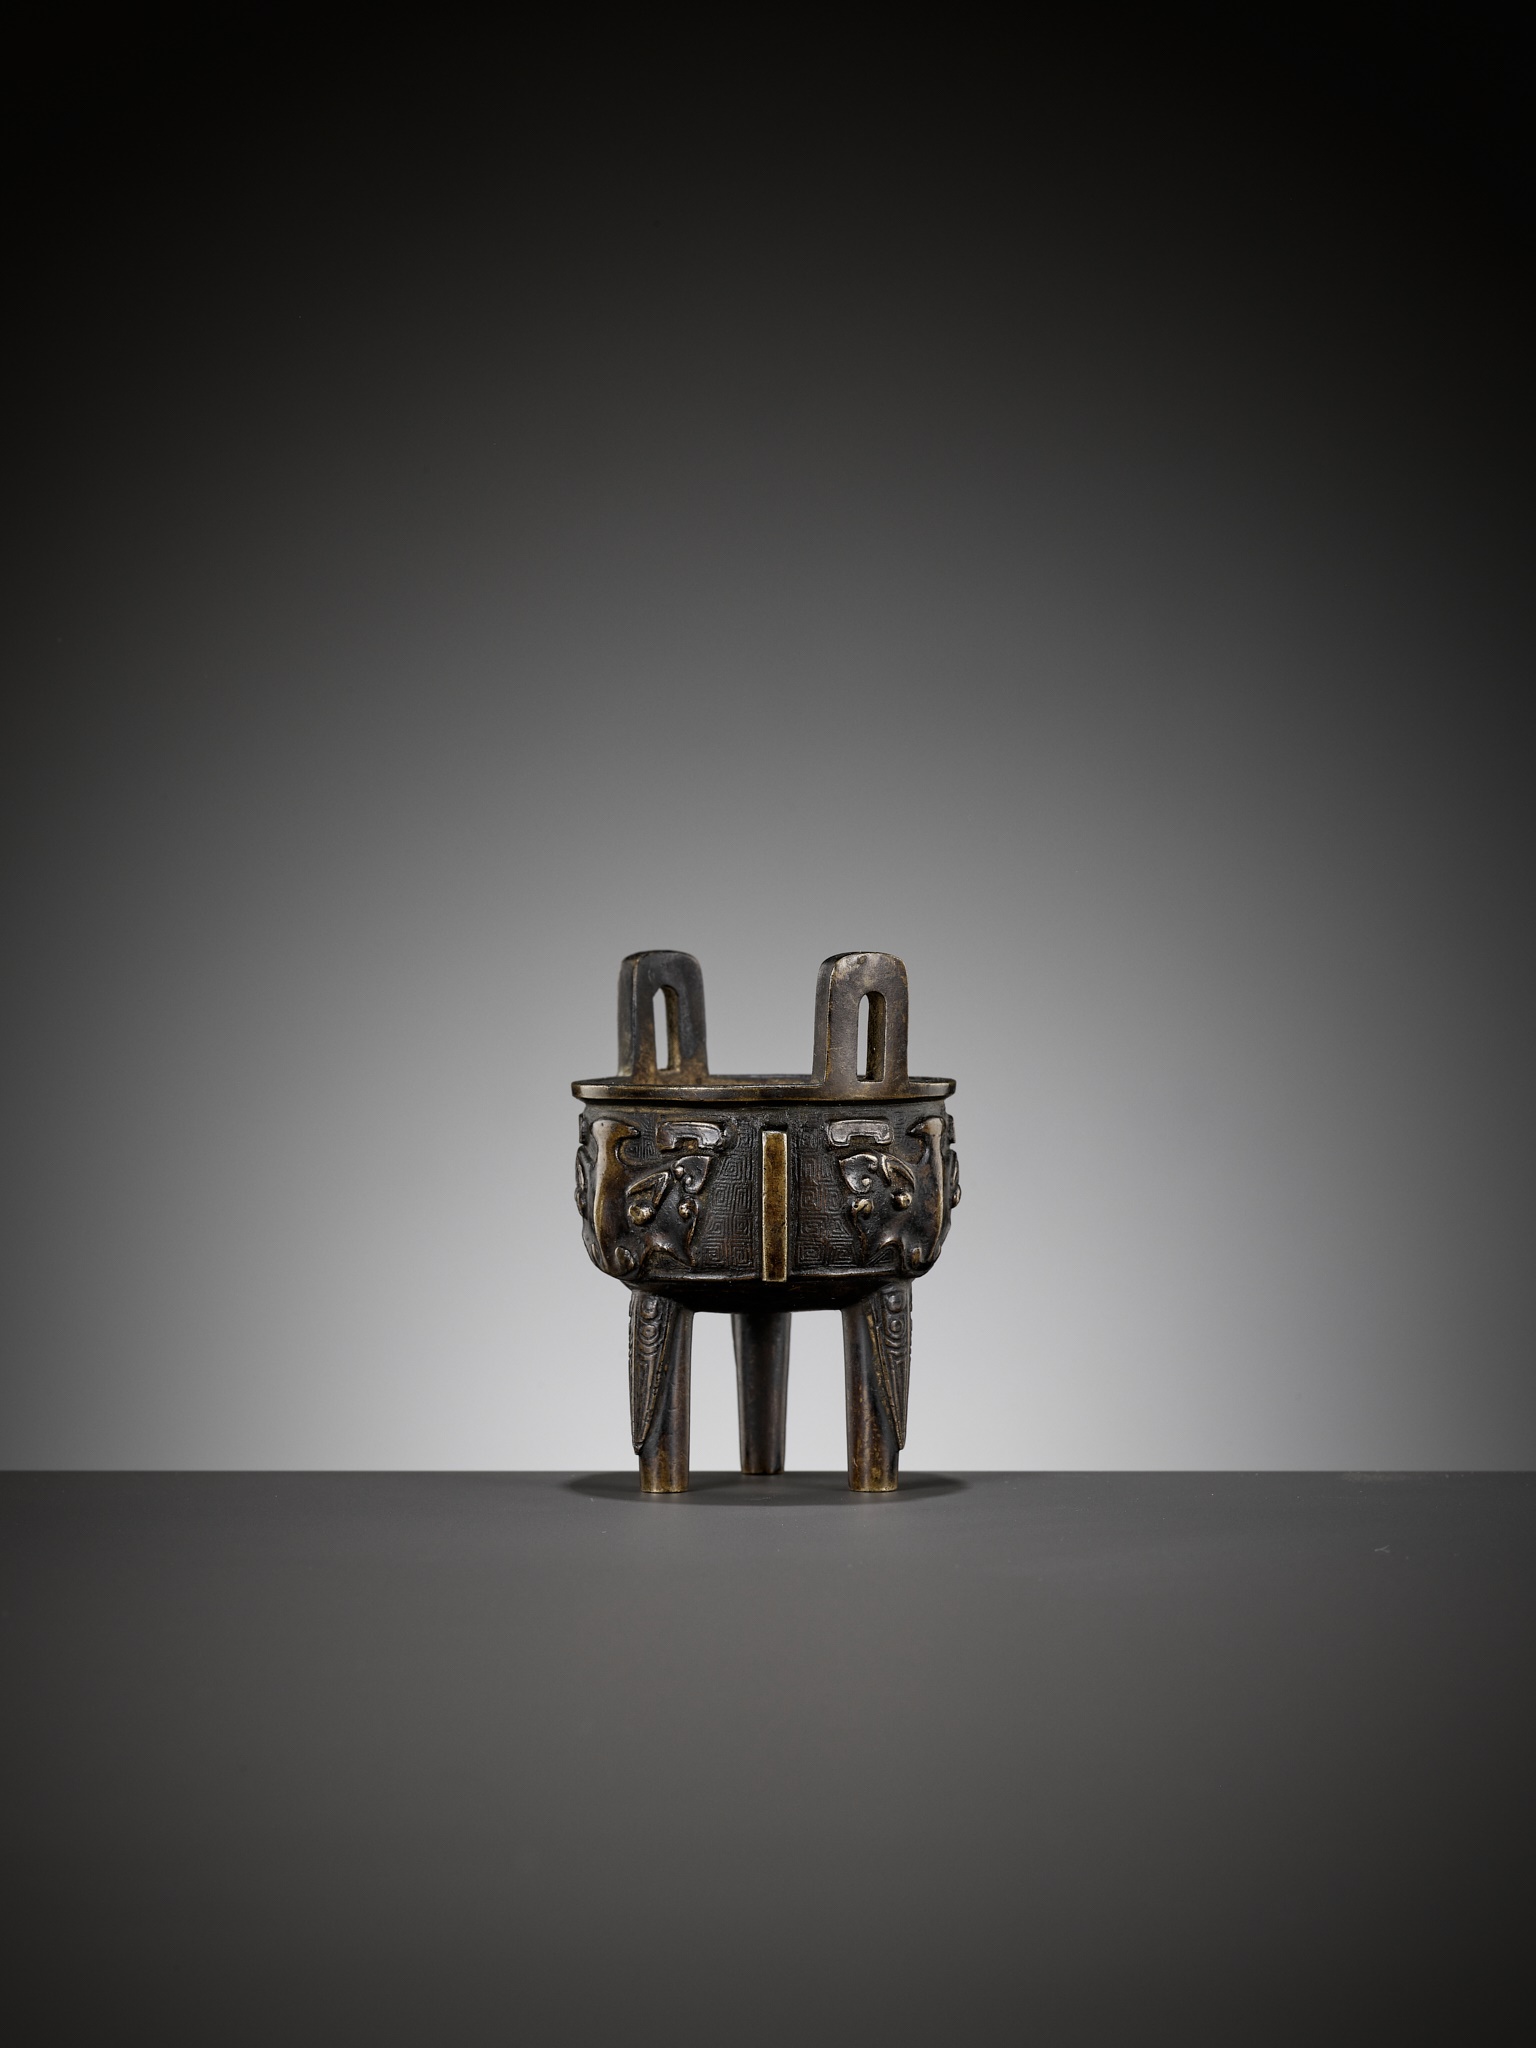 A BRONZE ARCHAISTIC MINIATURE TRIPOD CENSER, DING, QING DYNASTY, 17TH CENTURY - Image 3 of 11